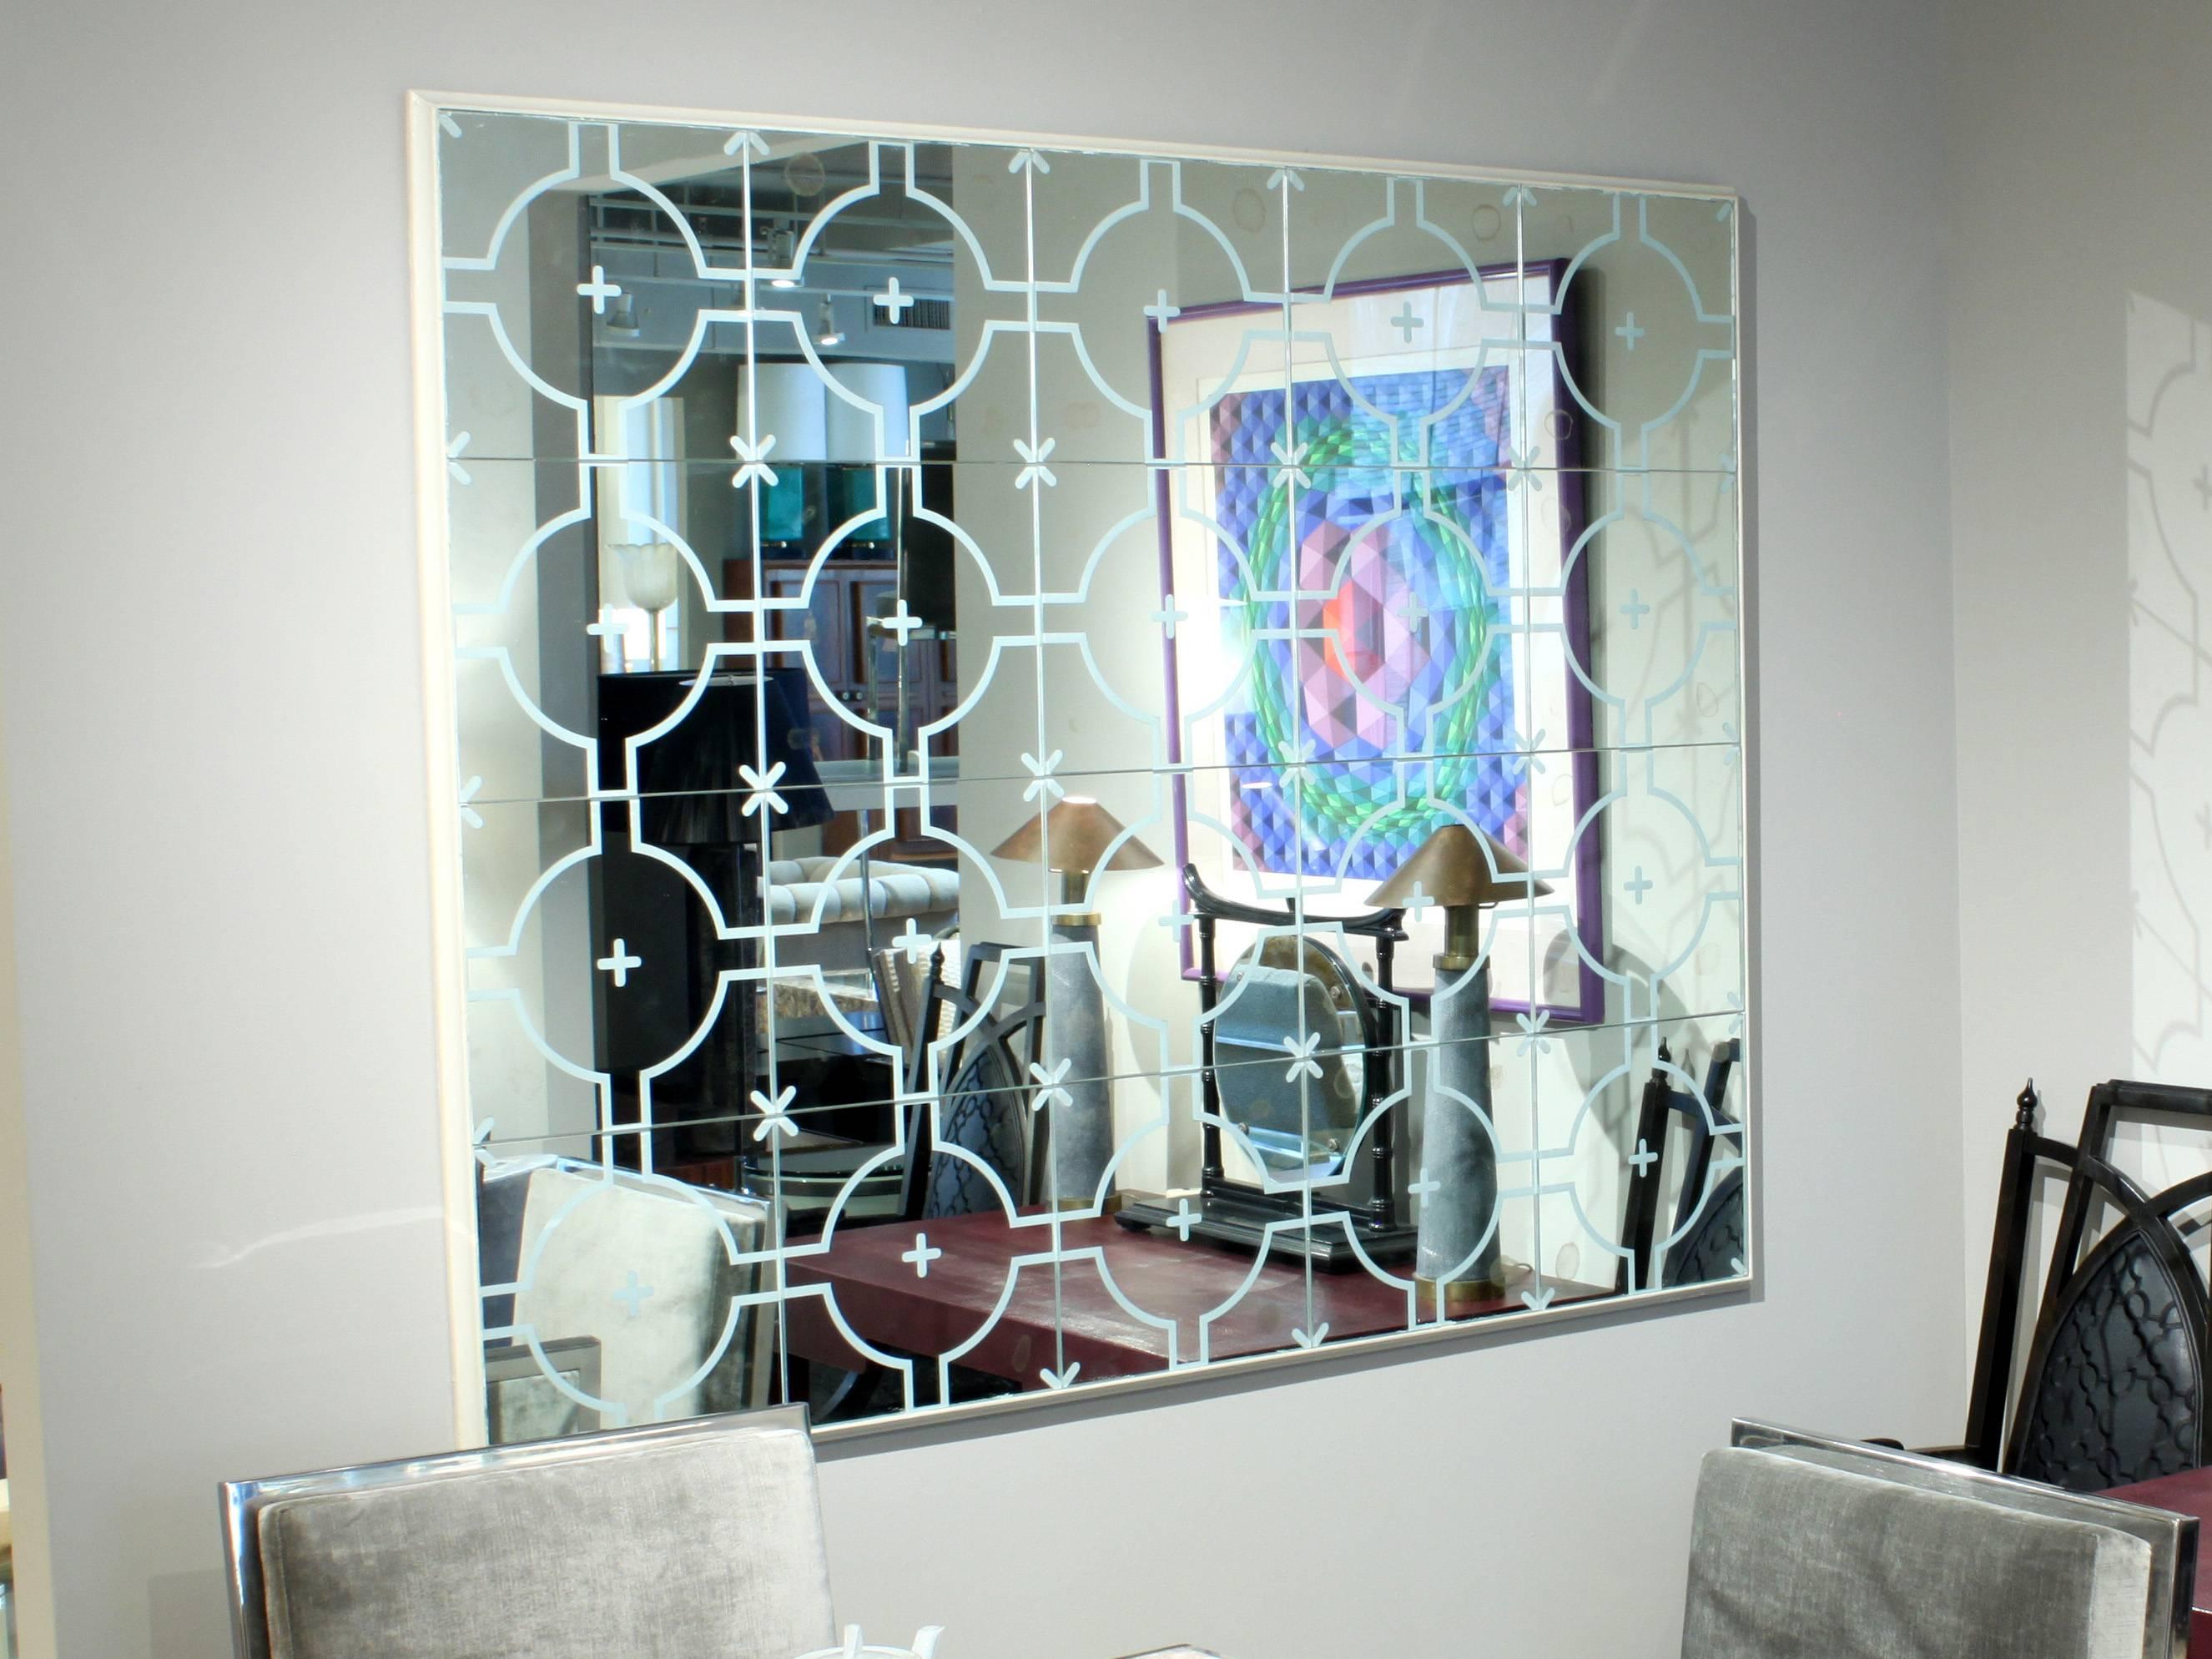 North American Mirror with Reverse Beveled Geometric Decoration by Tommi Parzinger